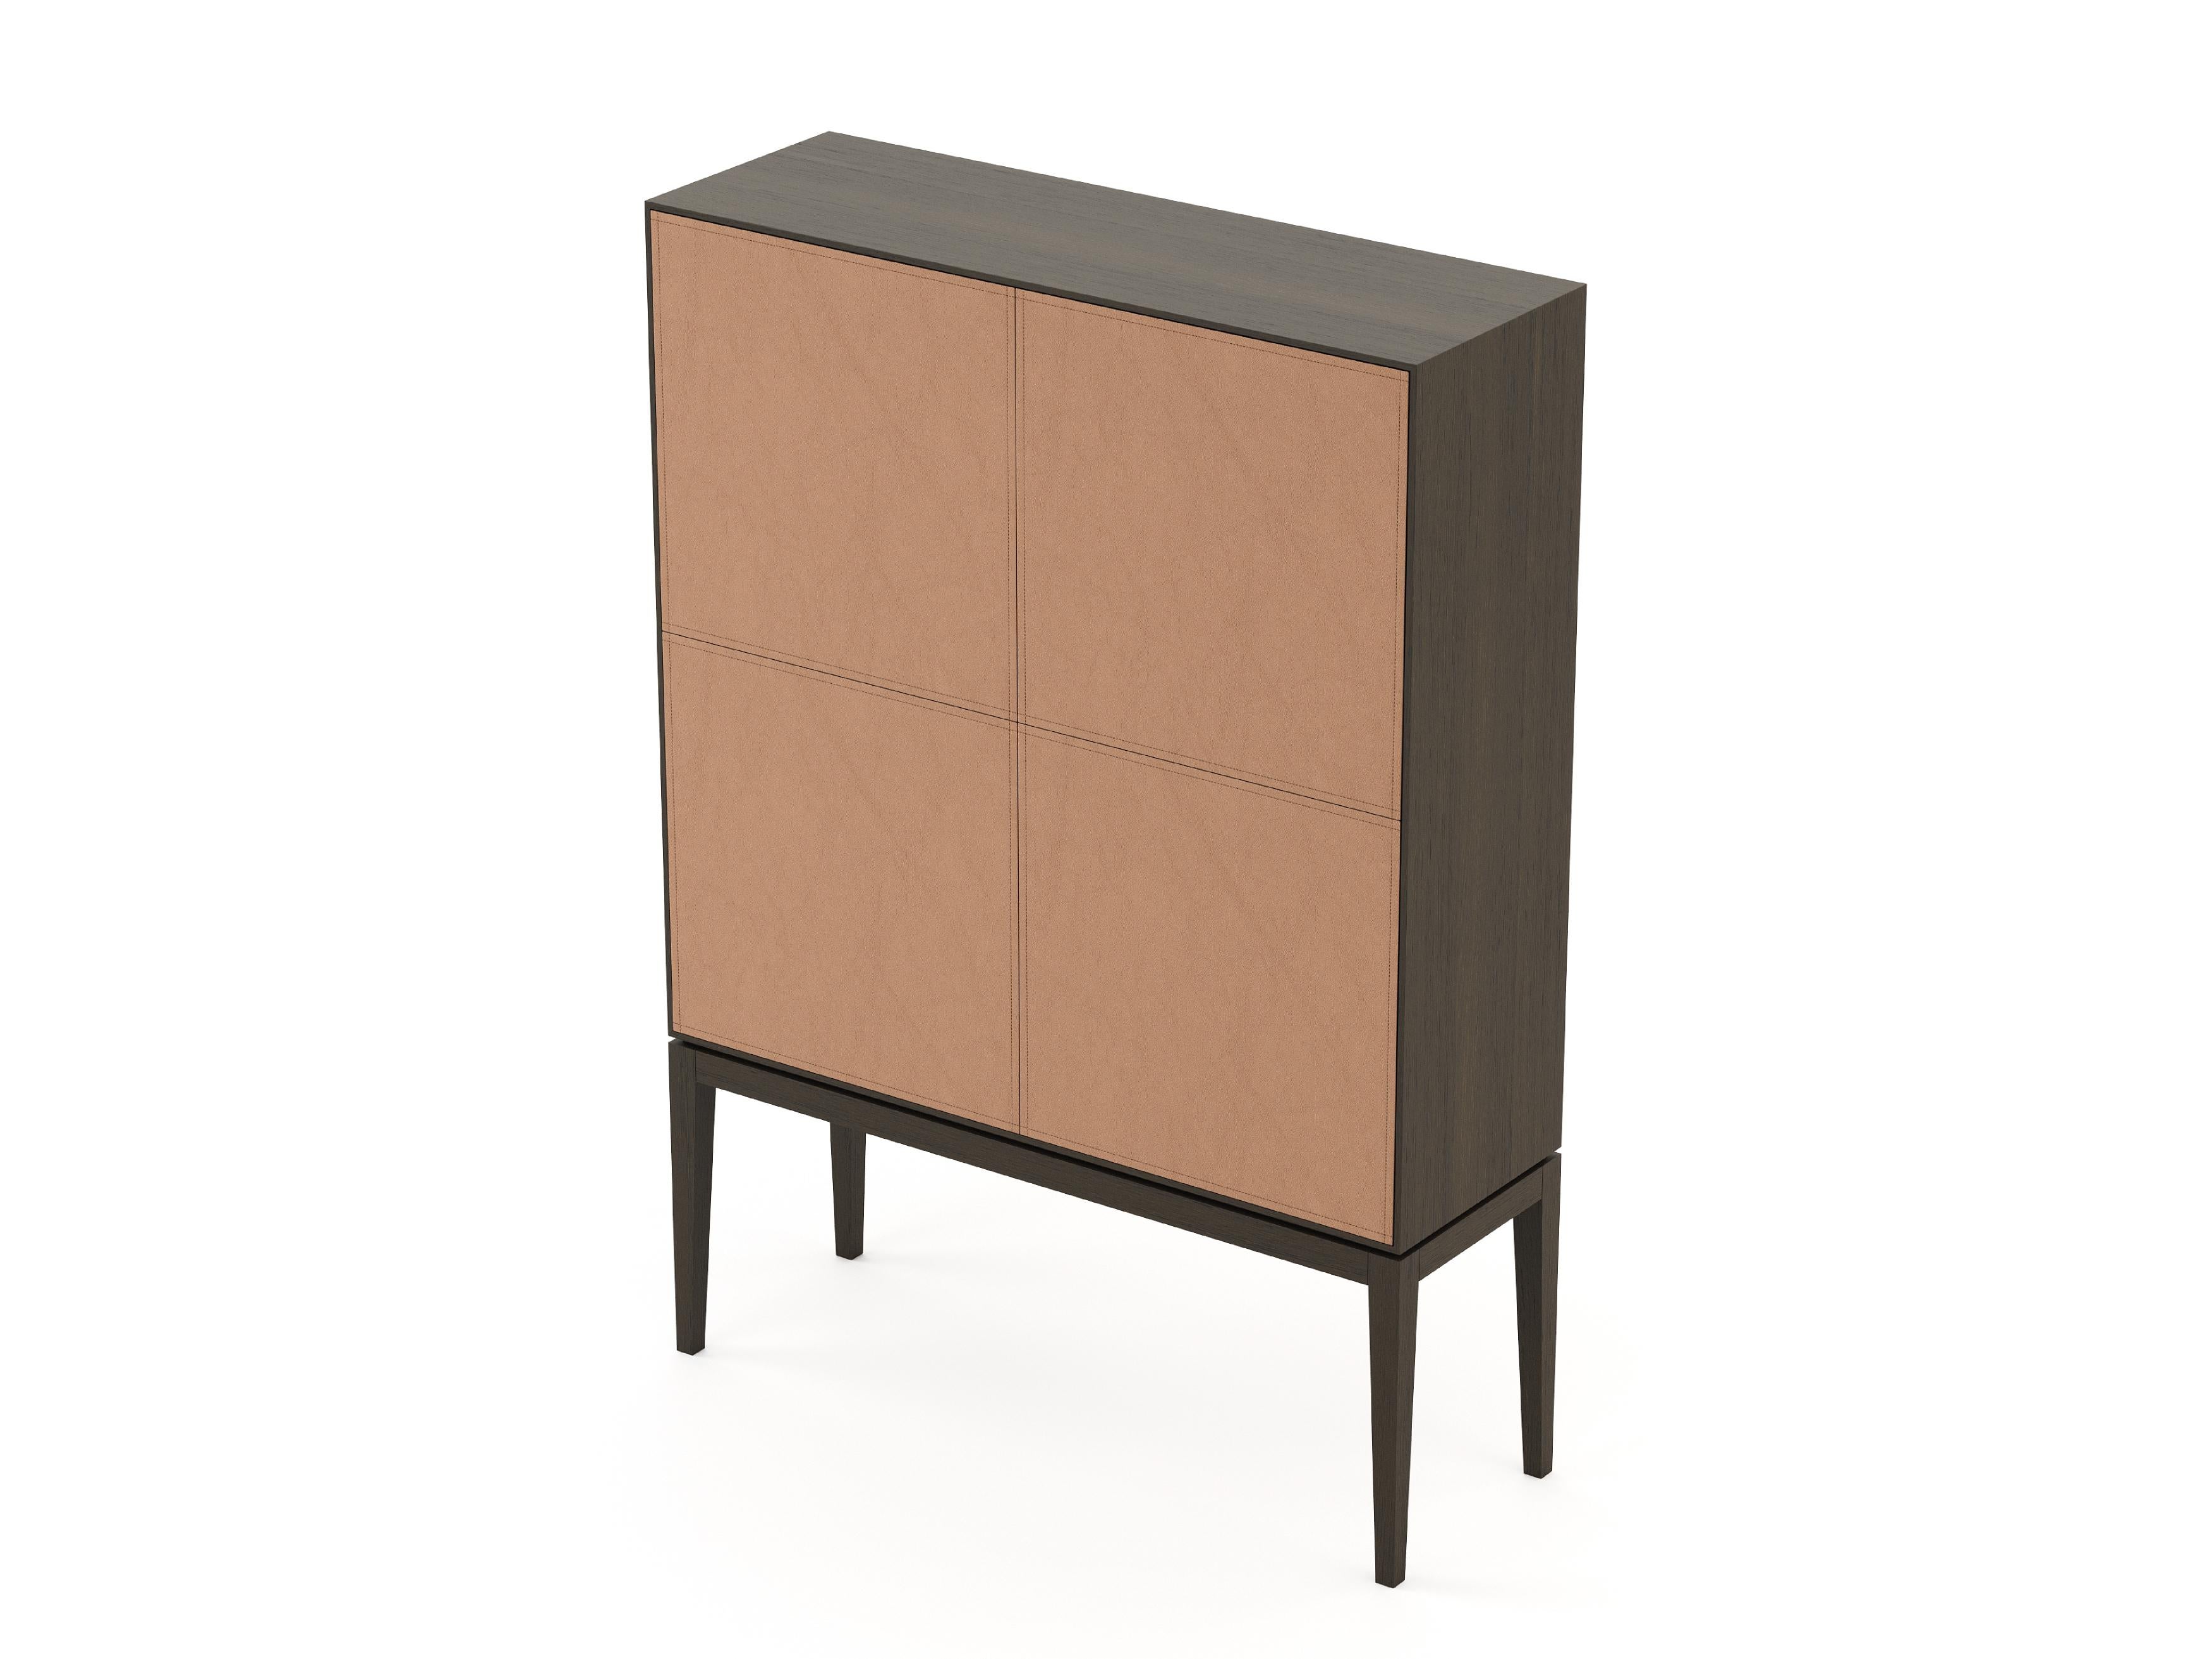 Portuguese Mid-Century Modern Heritage Bar Cabinet Made with Oak and Leather Details For Sale